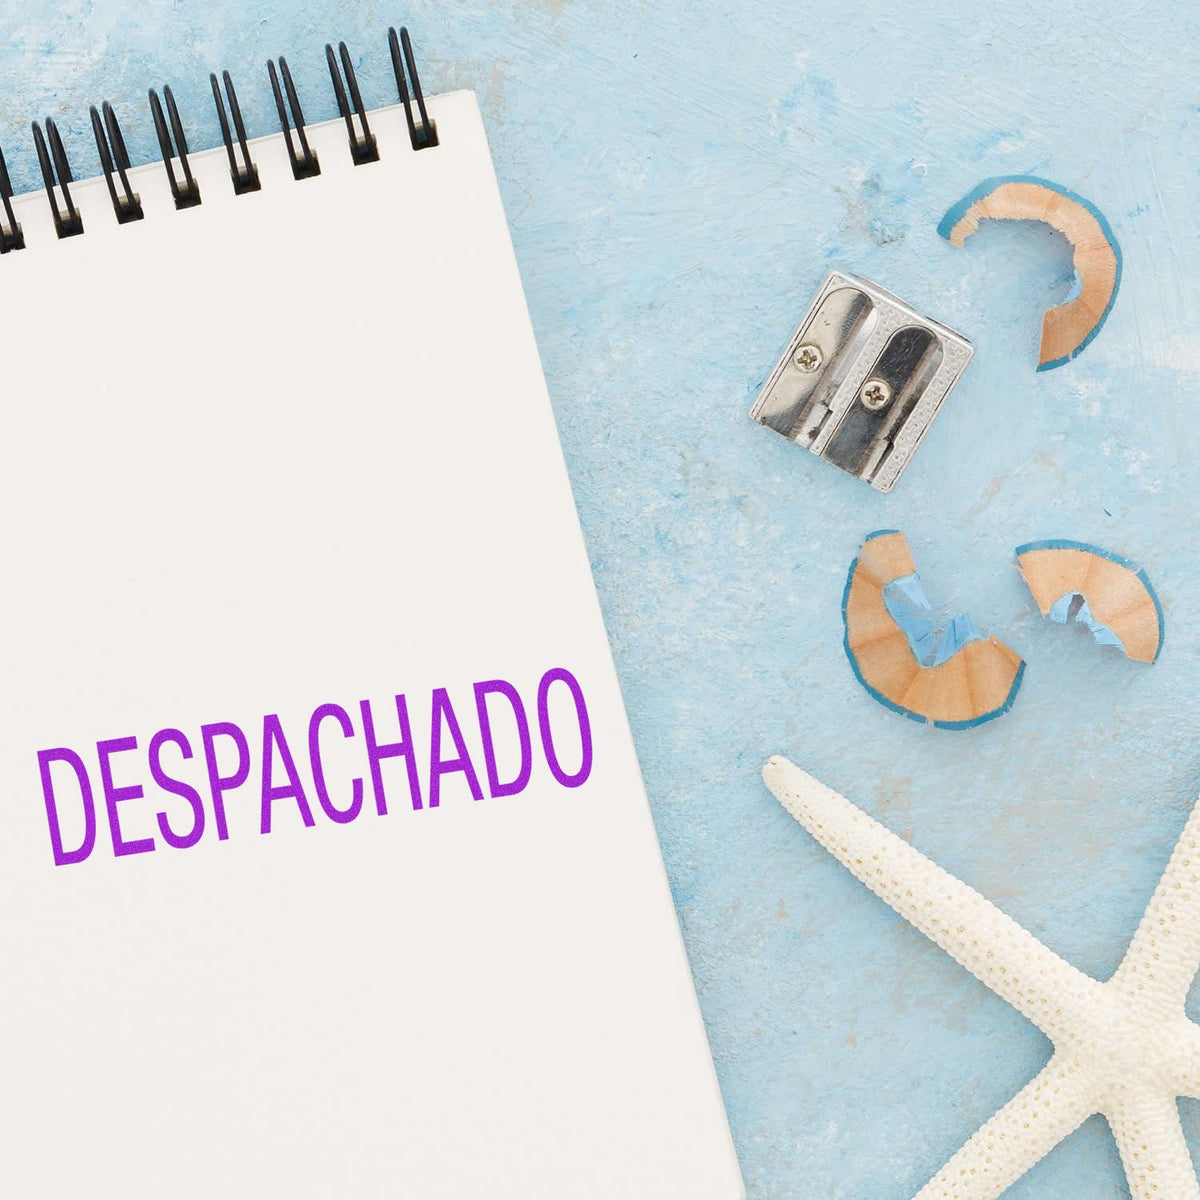 Large Despachado Rubber Stamp In Use